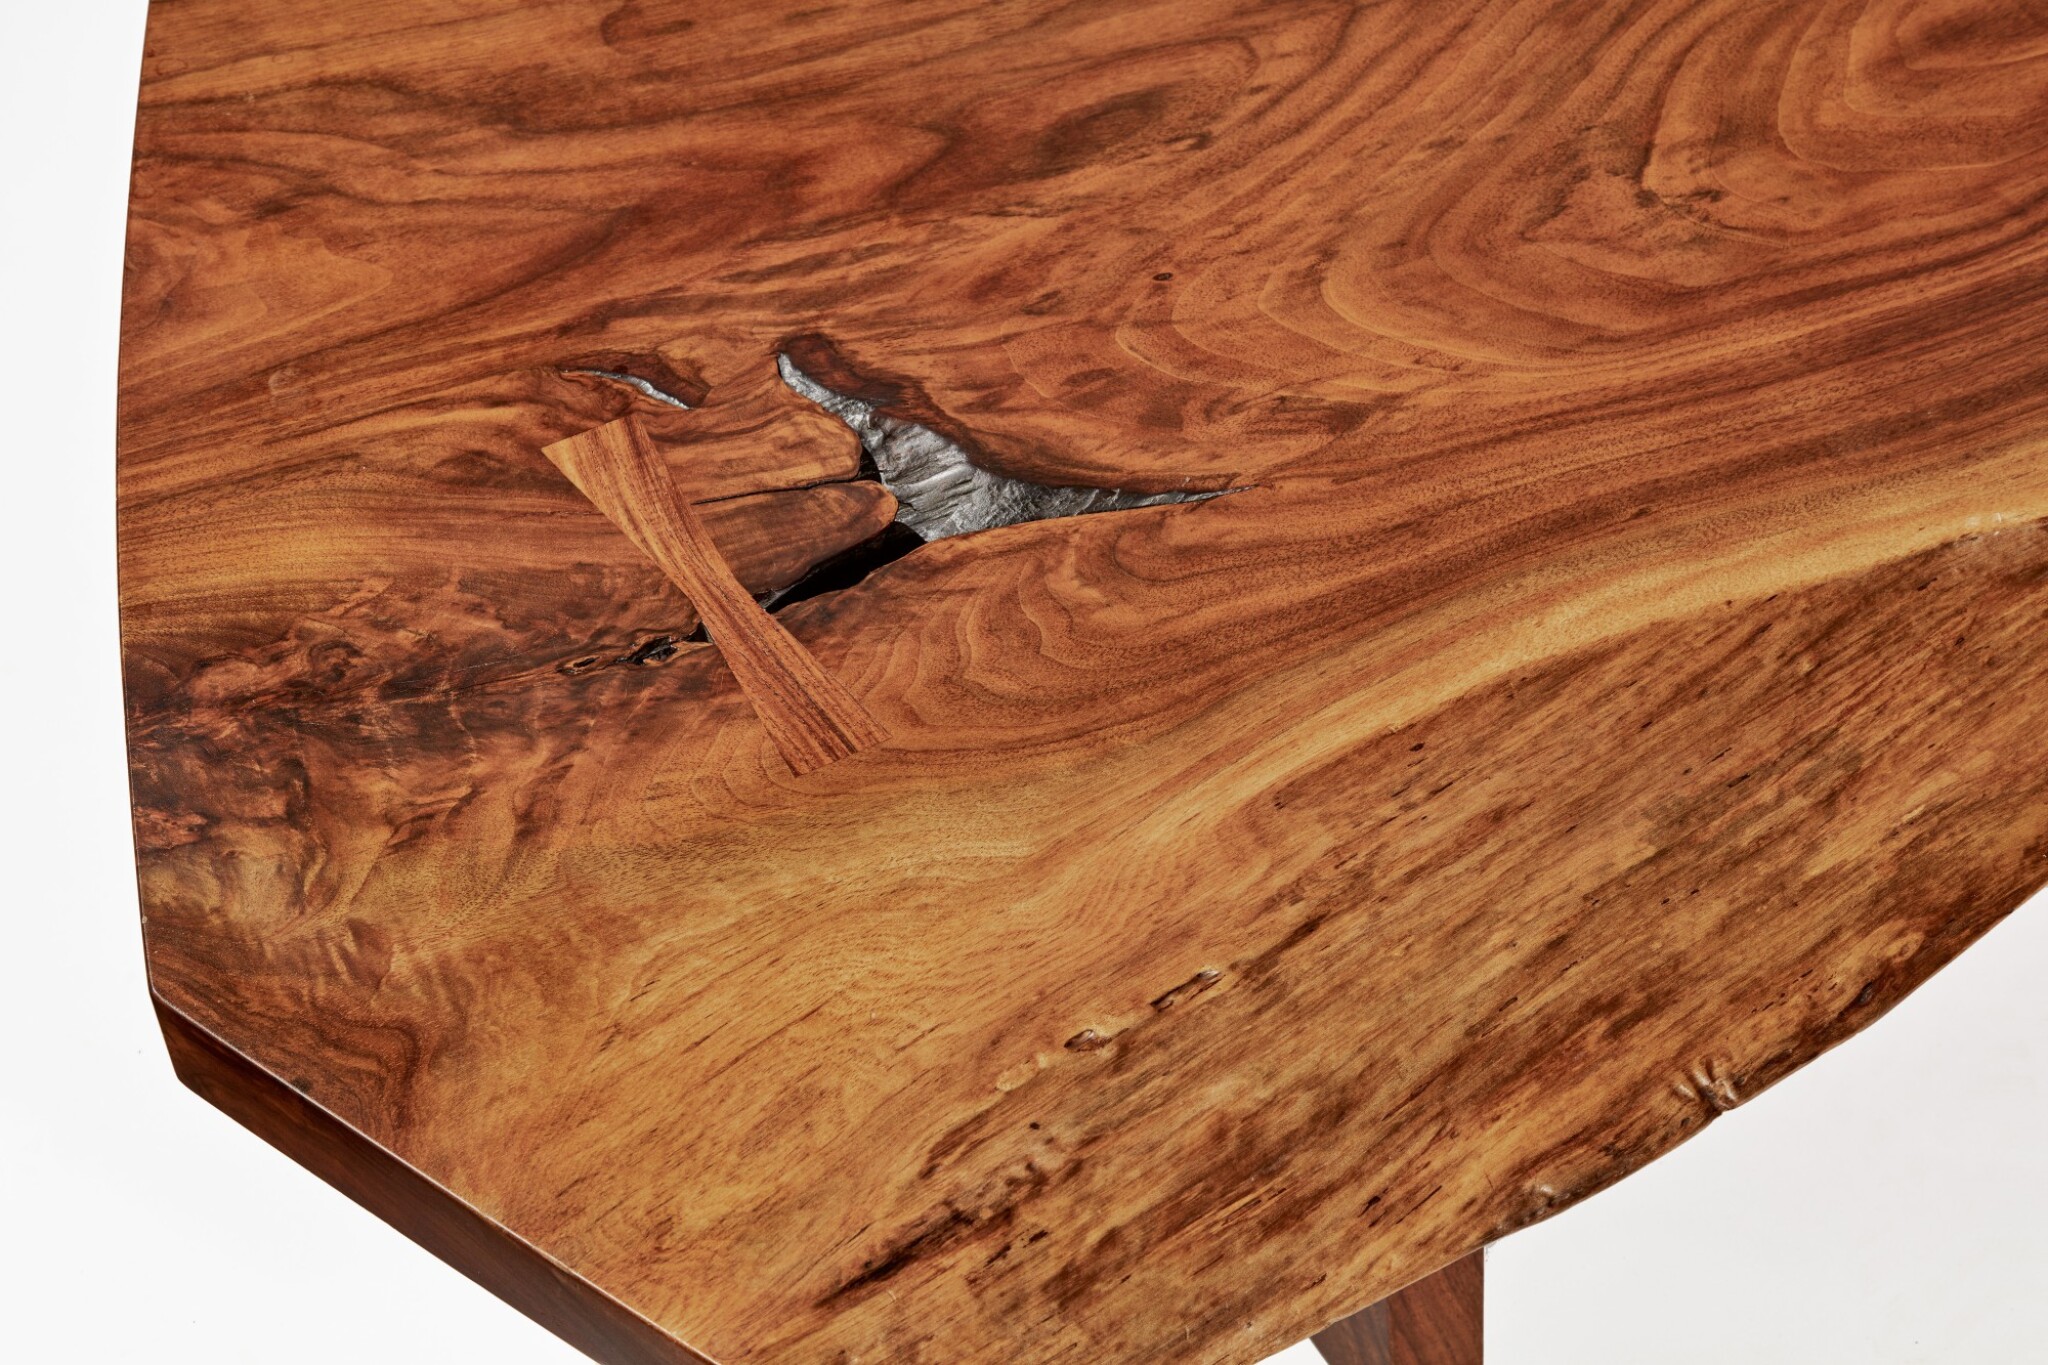 A close-up of Nakashima's 1985 Conoid Slab Coffee Table displays the intricate woodworking required to pull off his signature butterfly joint